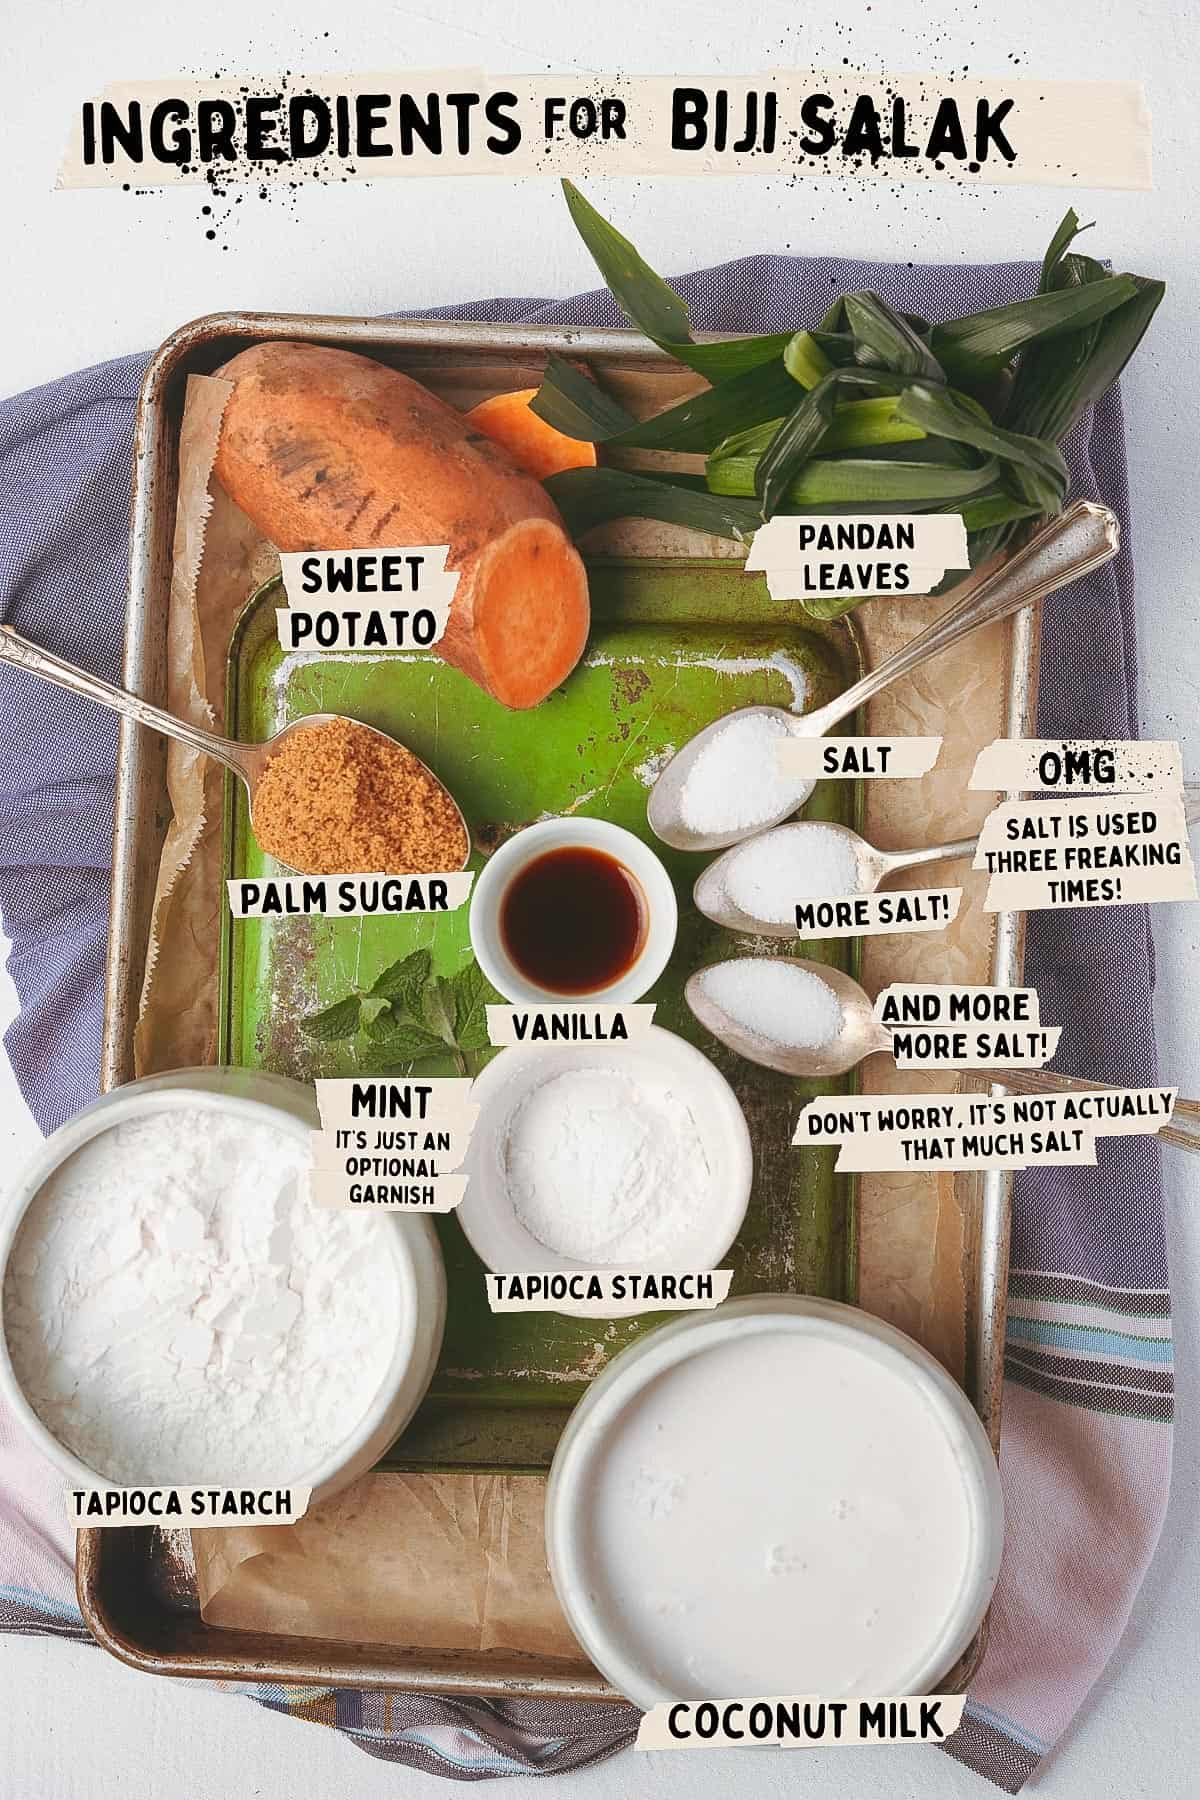 Ingredients for biji salak are laid out and labeled on a tray.